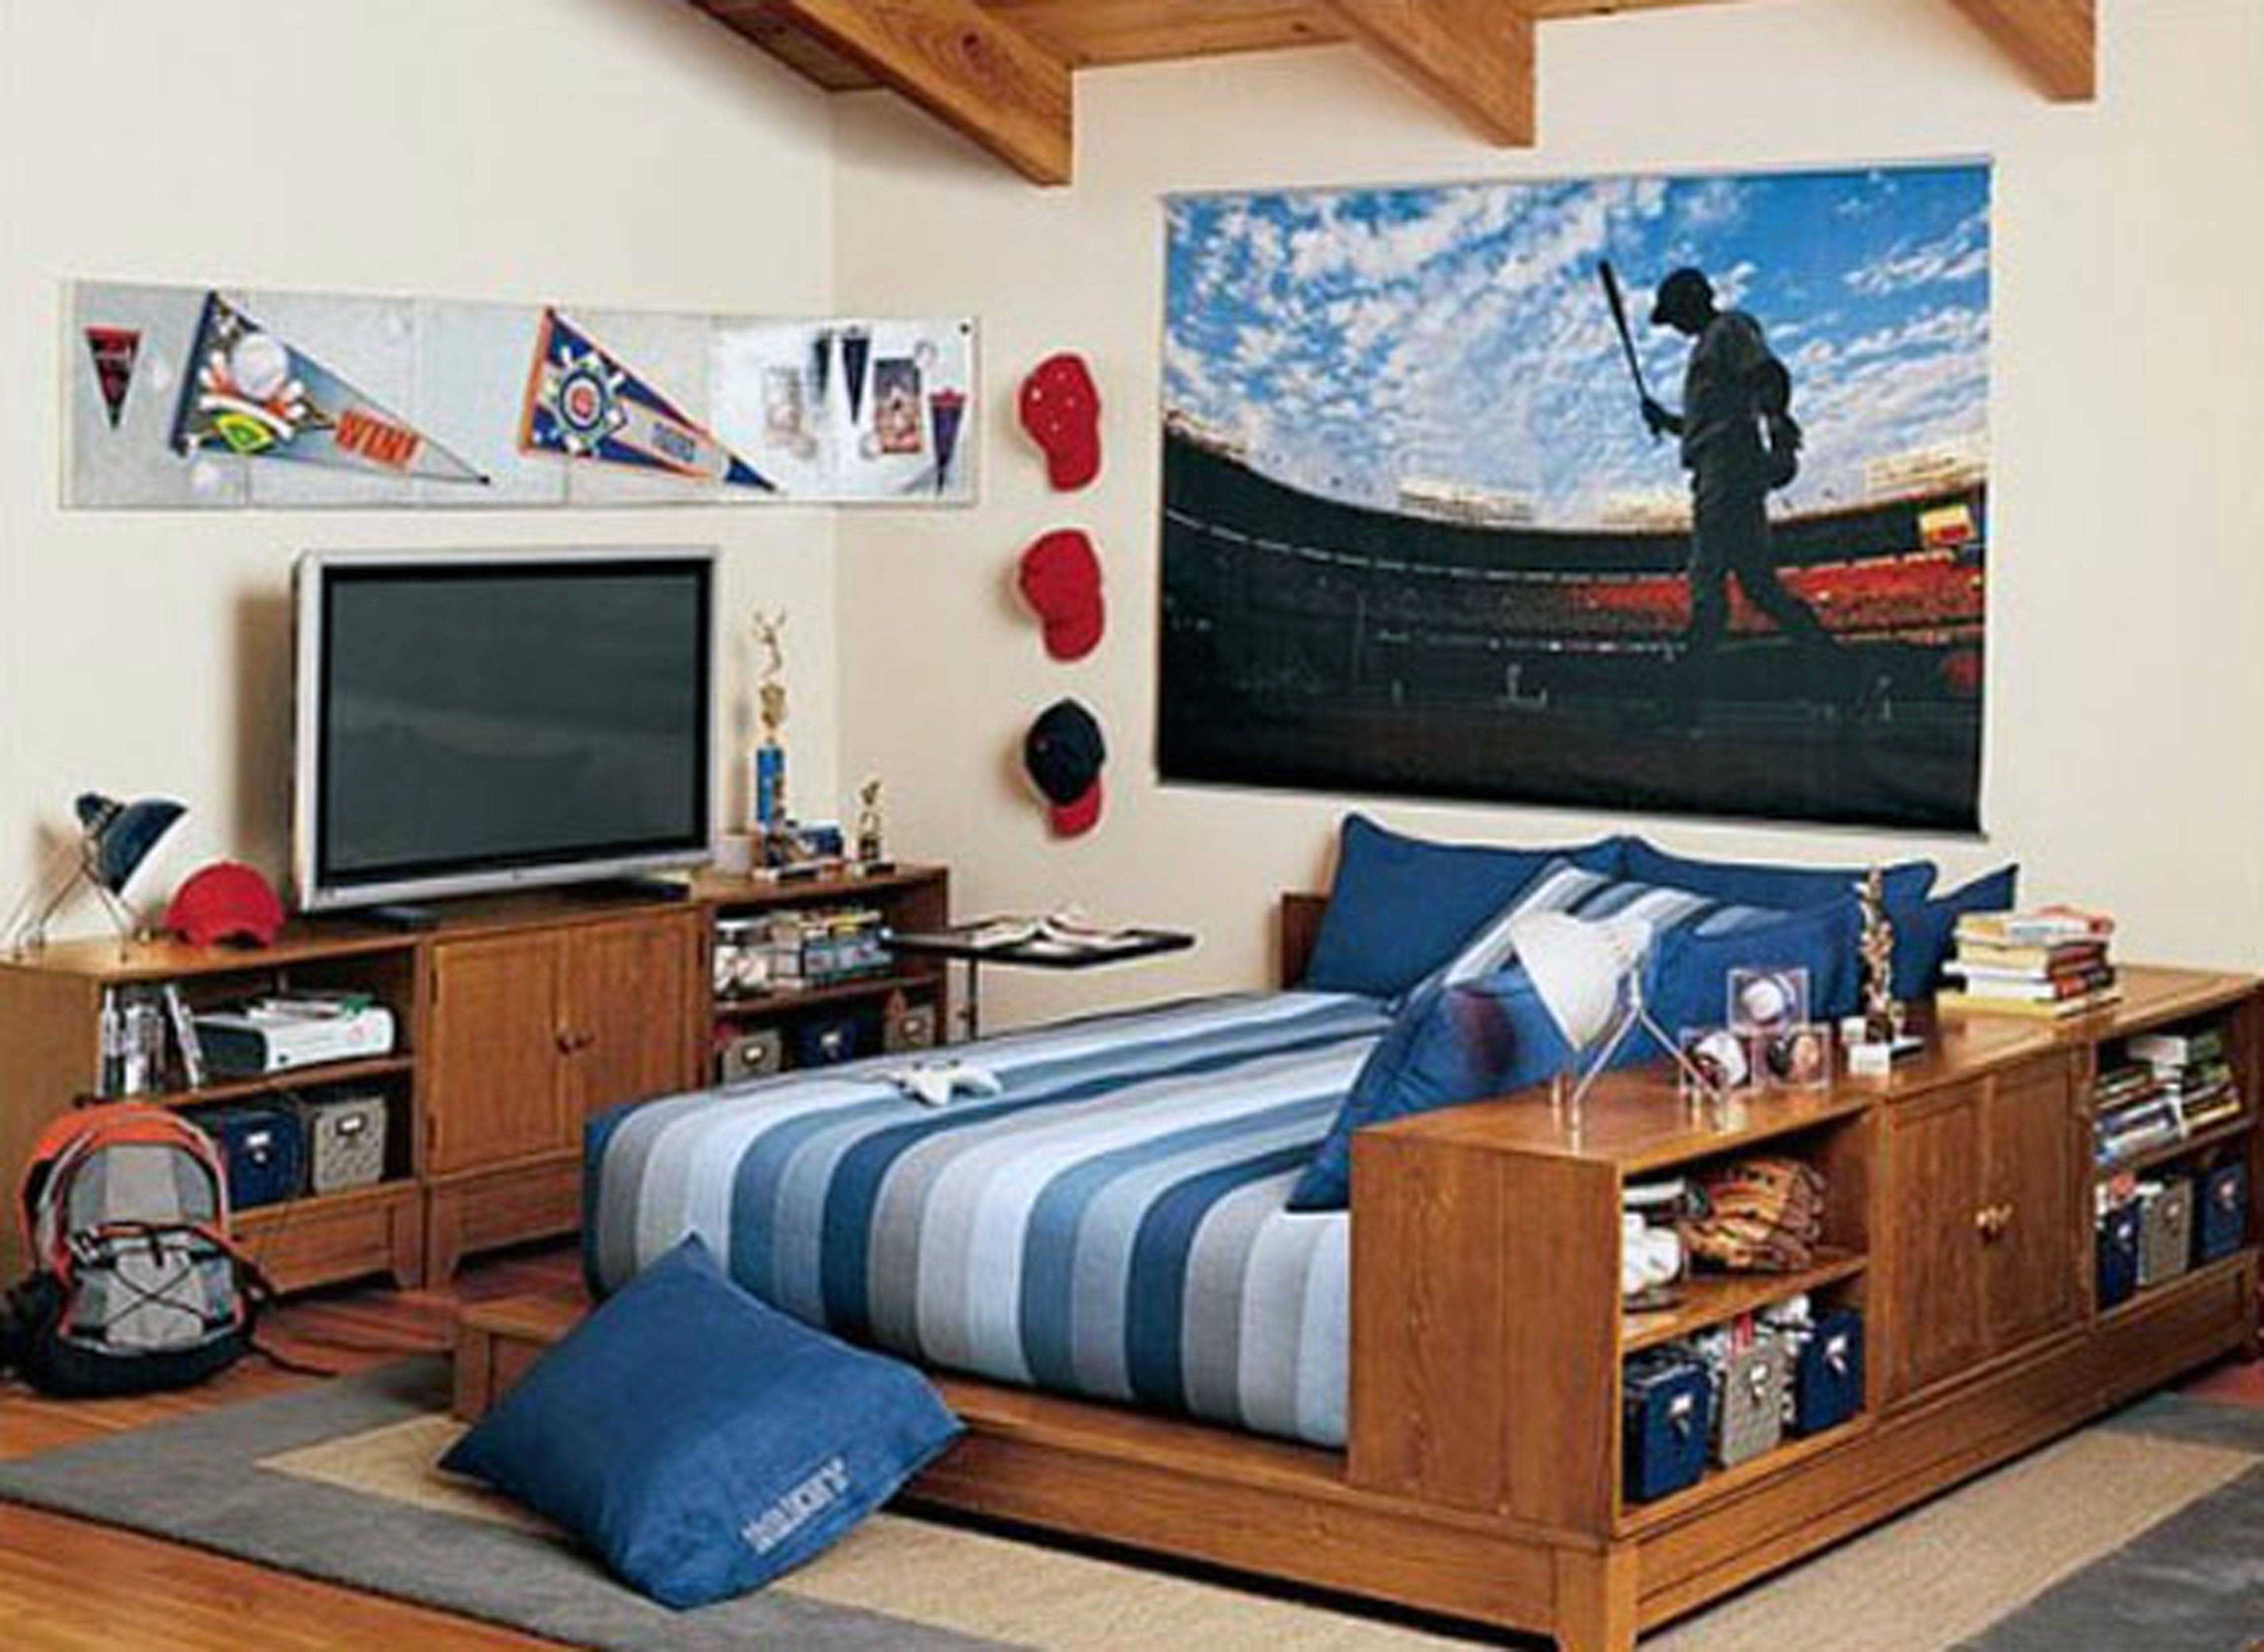 Cool Room Designs for Guys | Home Design